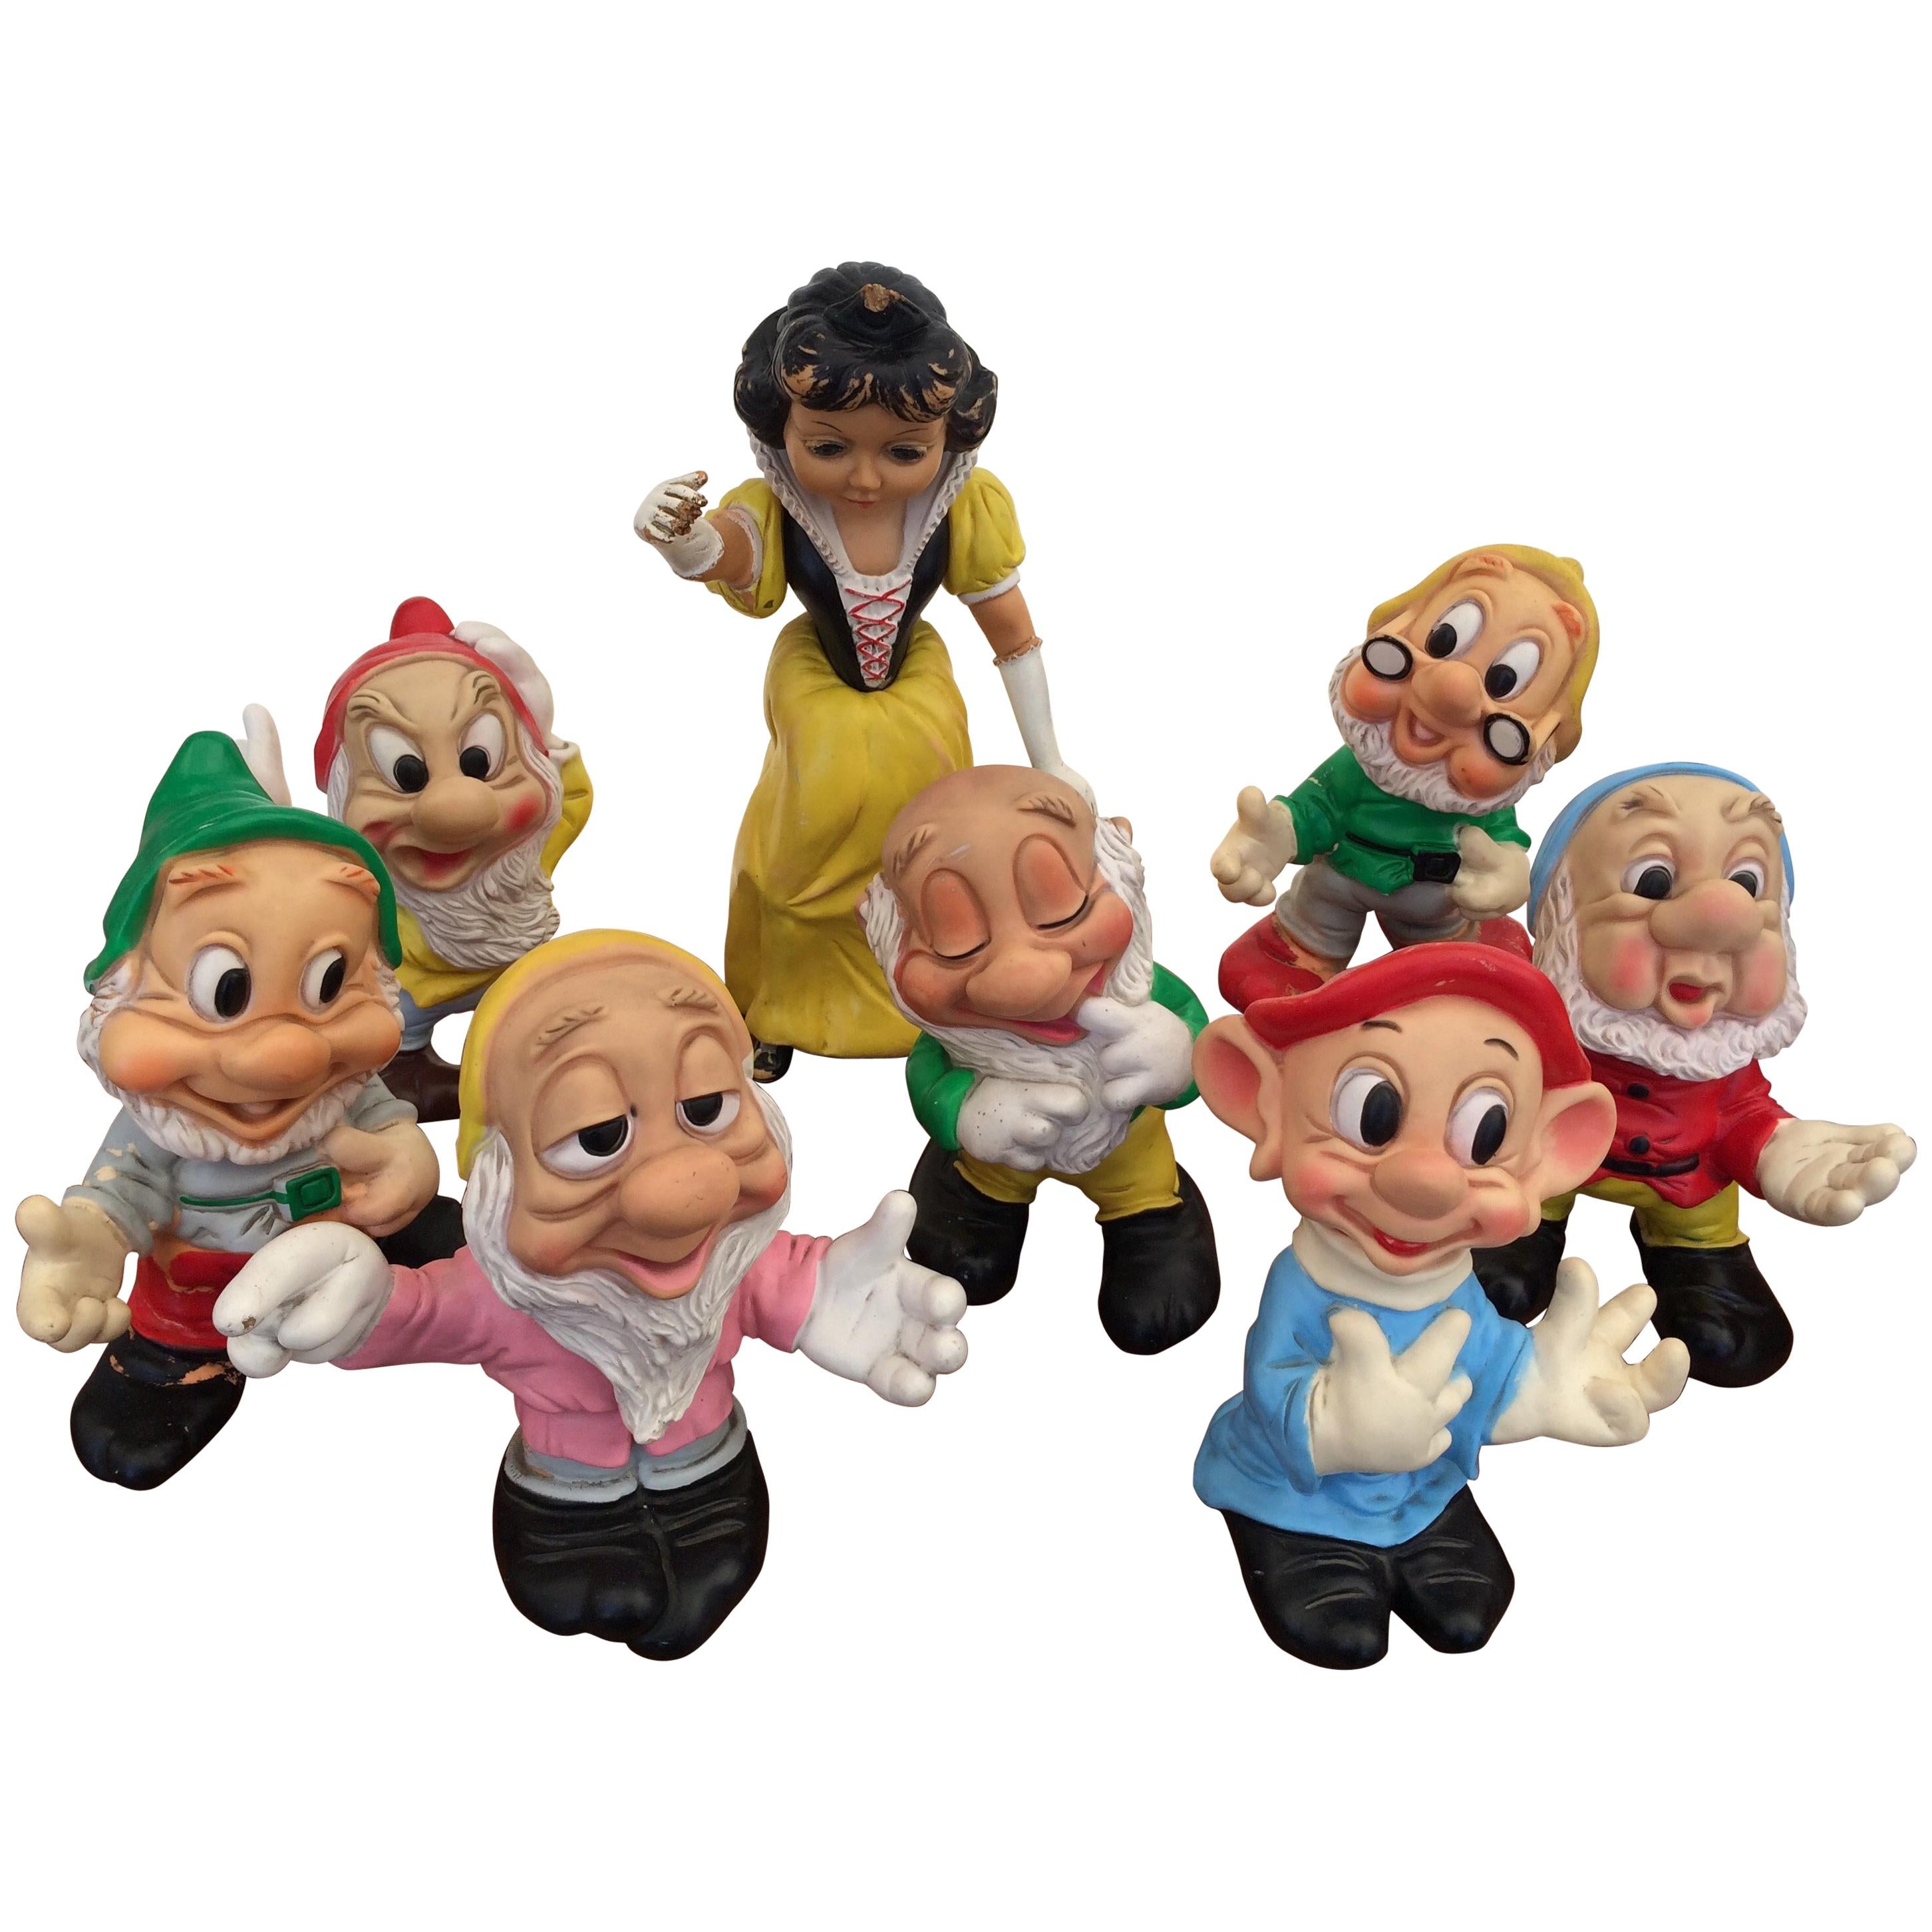 Iconic American Collectors Snow White and the Seven Dwarfs Whistling Toys